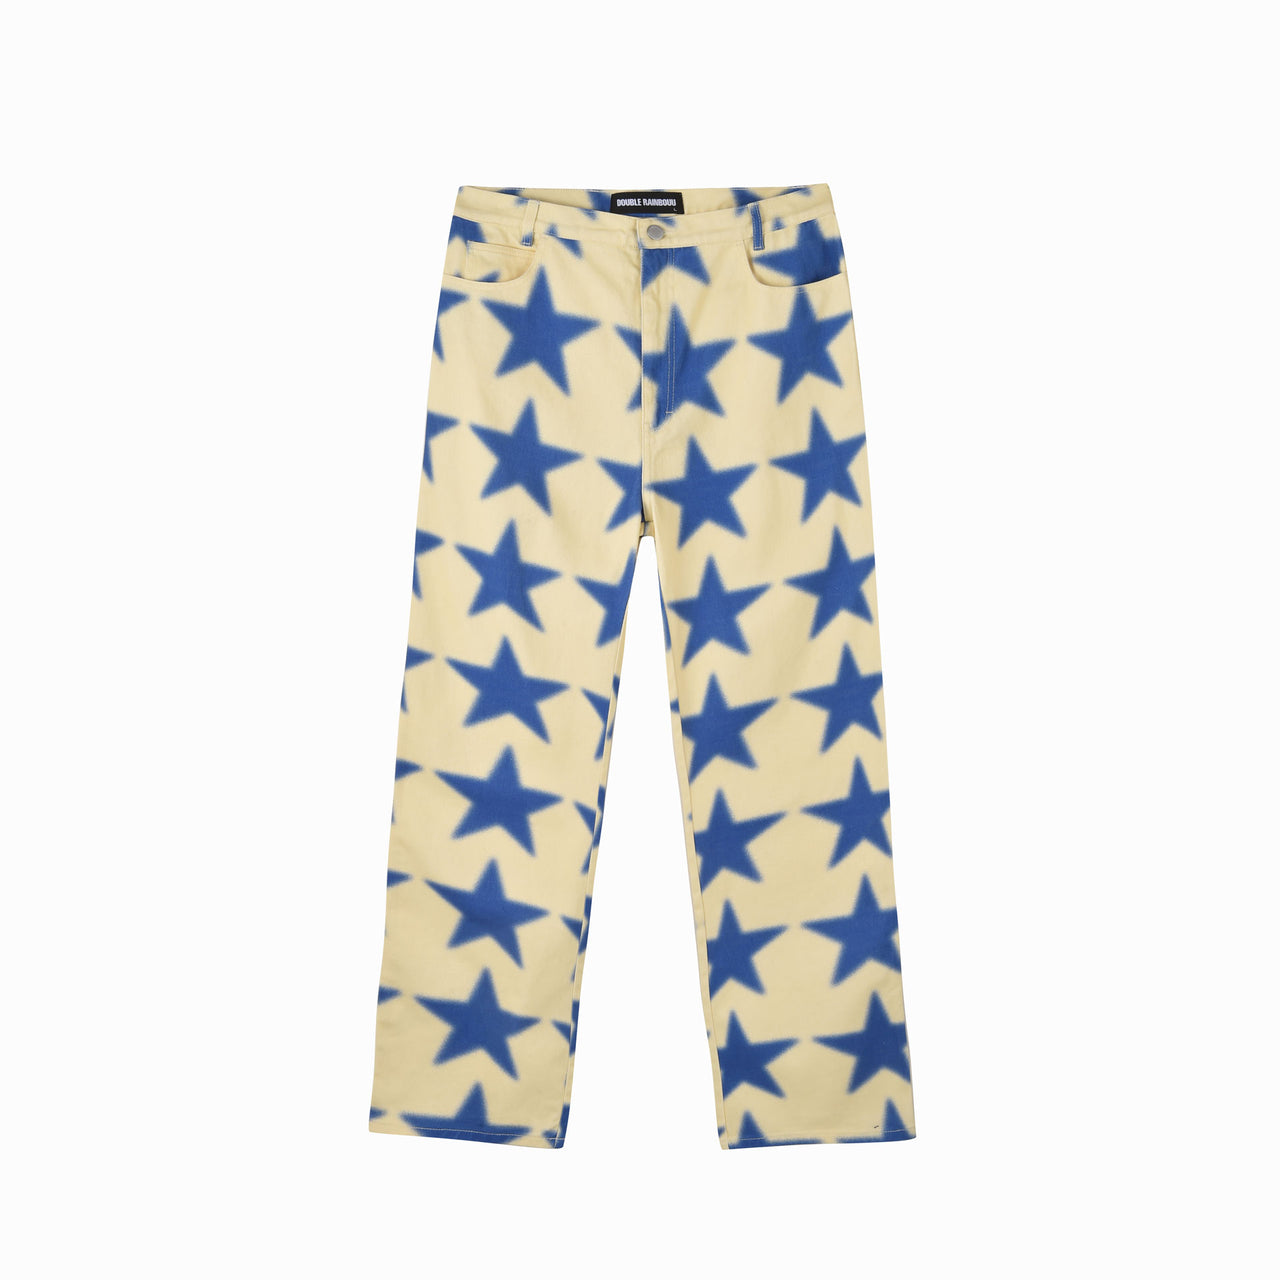 BLUE STAR PARTY PANTS